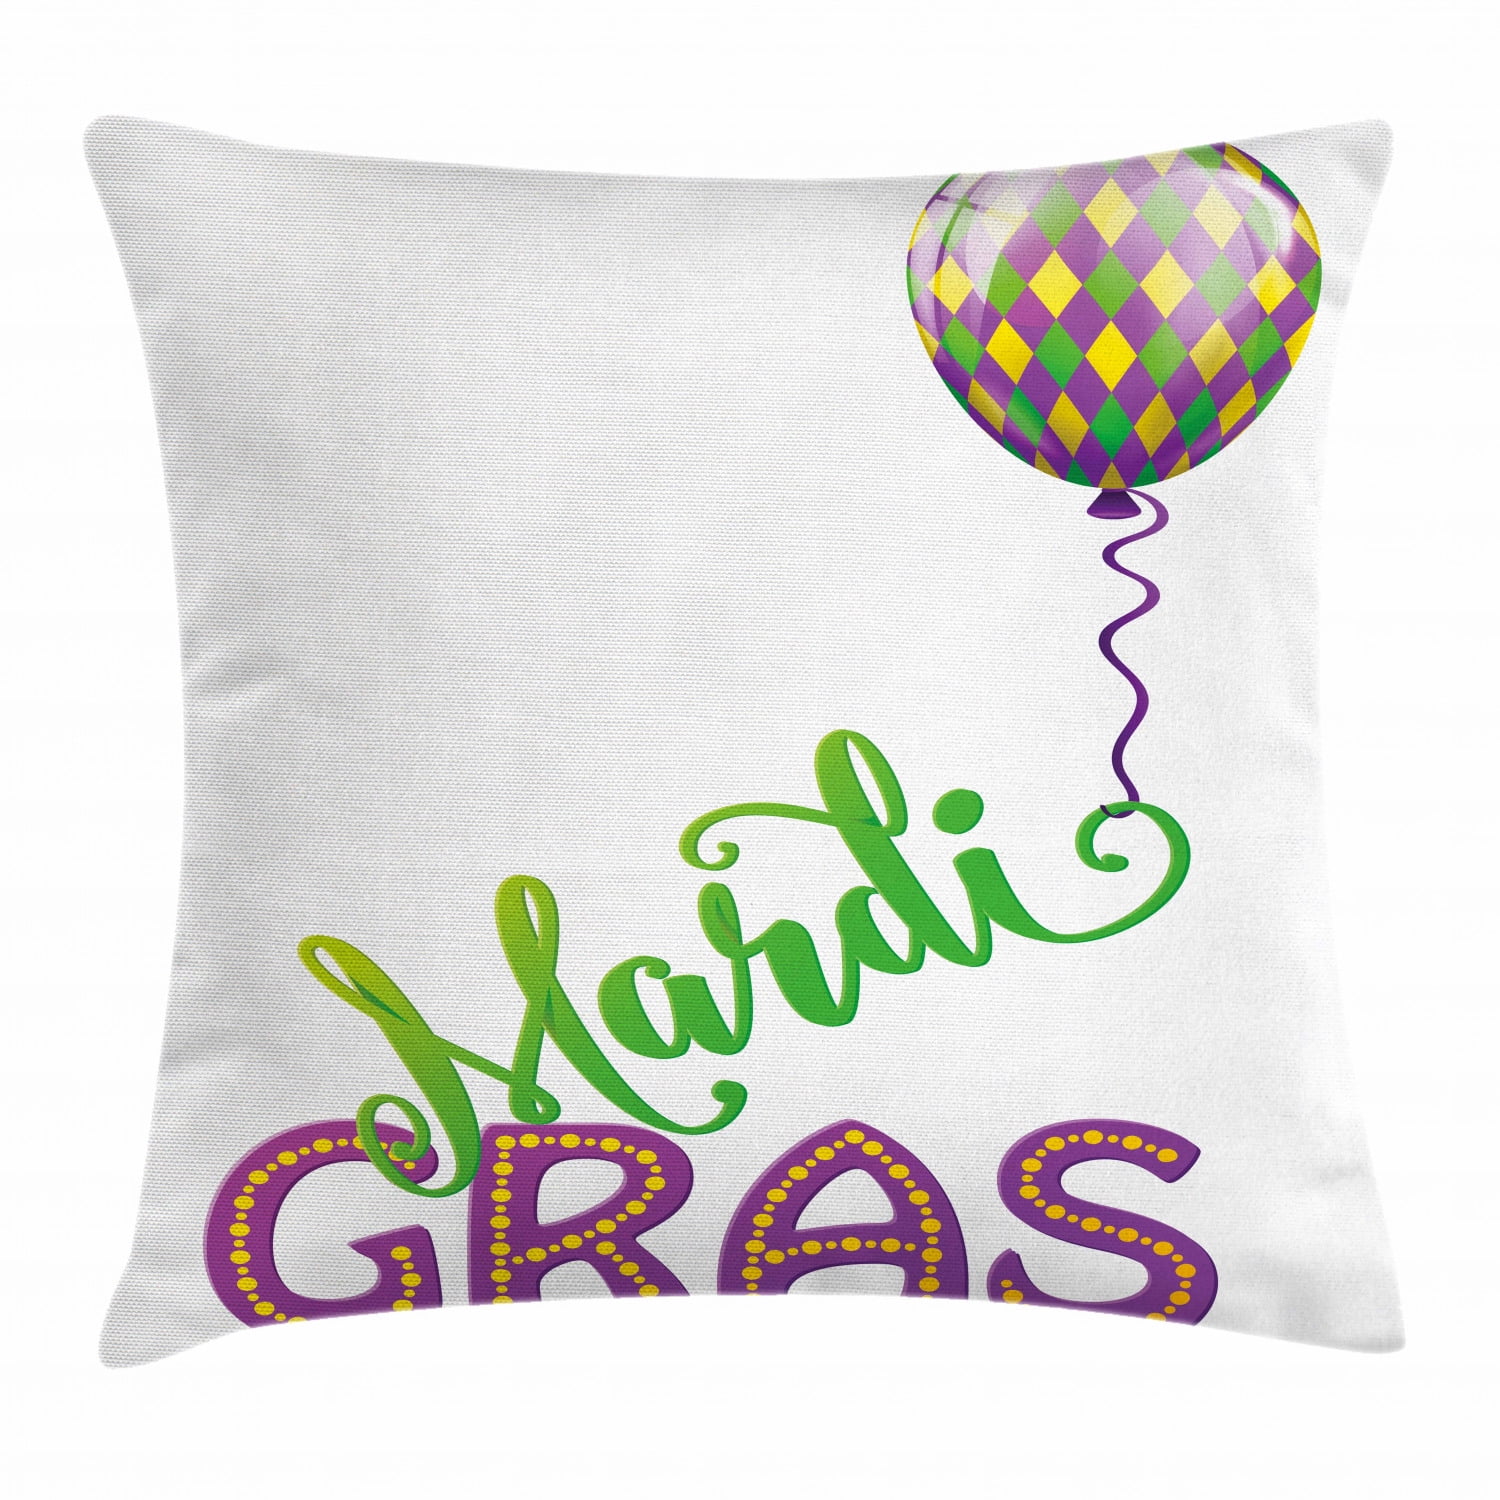 Mardi Gras Throw Pillow Cushion Cover, Illustration of Cartoon Mardi Gras  Color Balloon with Swirl Ribbon, Decorative Square Accent Pillow Case, 24 X  24 Inches, Purple Green Yellow, by Ambesonne 